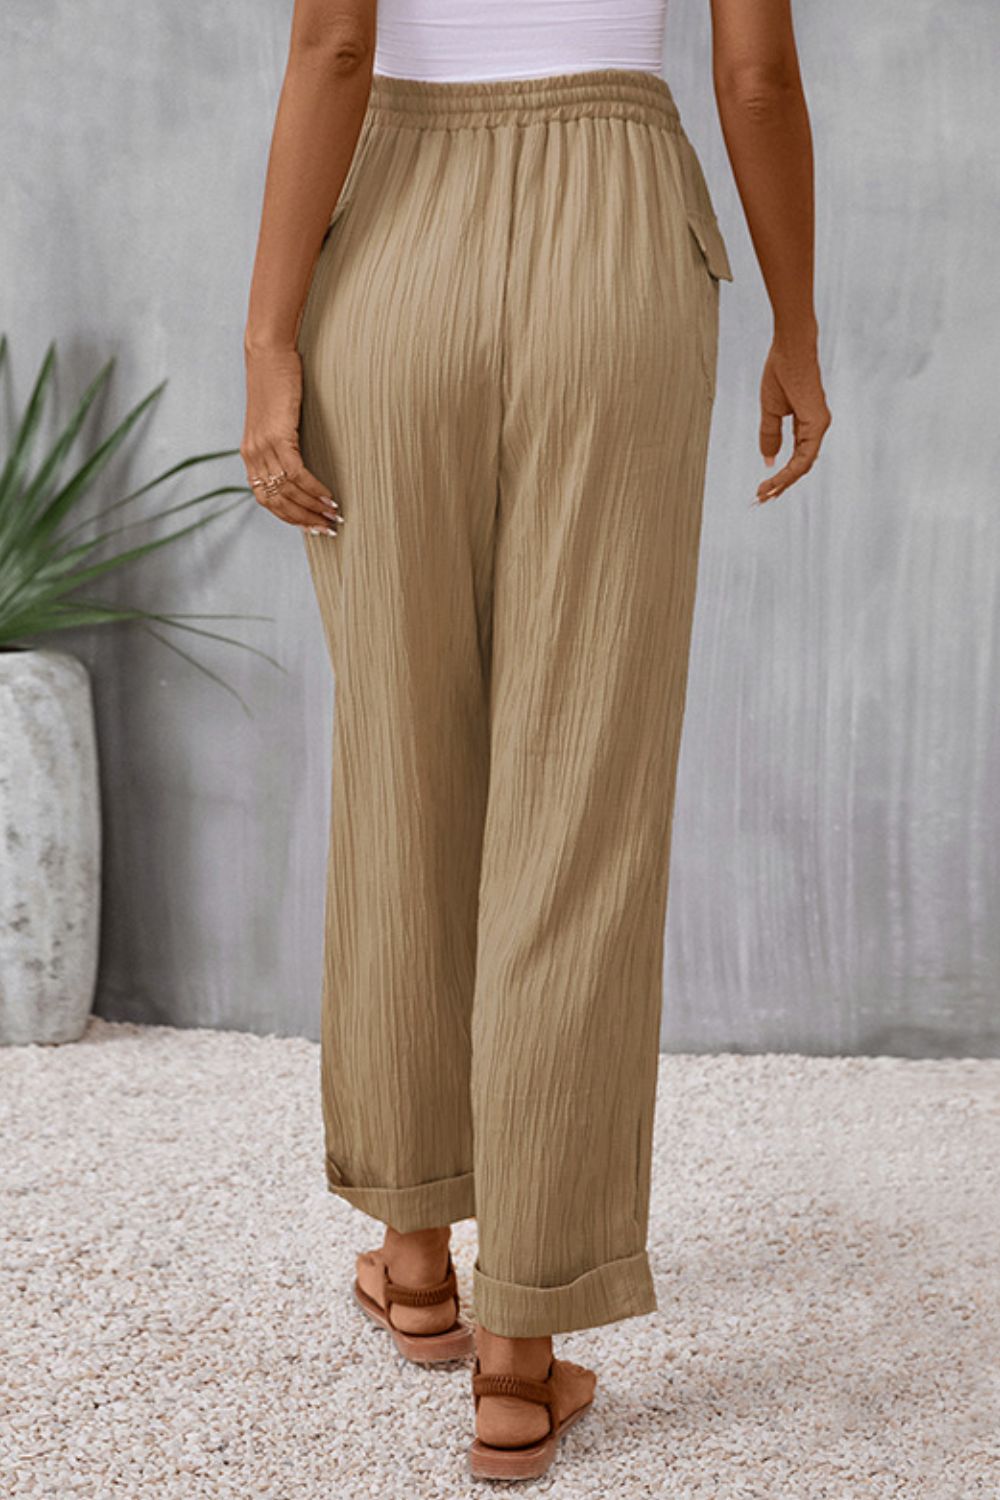 Sandals in Paradise Pants - Cheeky Chic Boutique